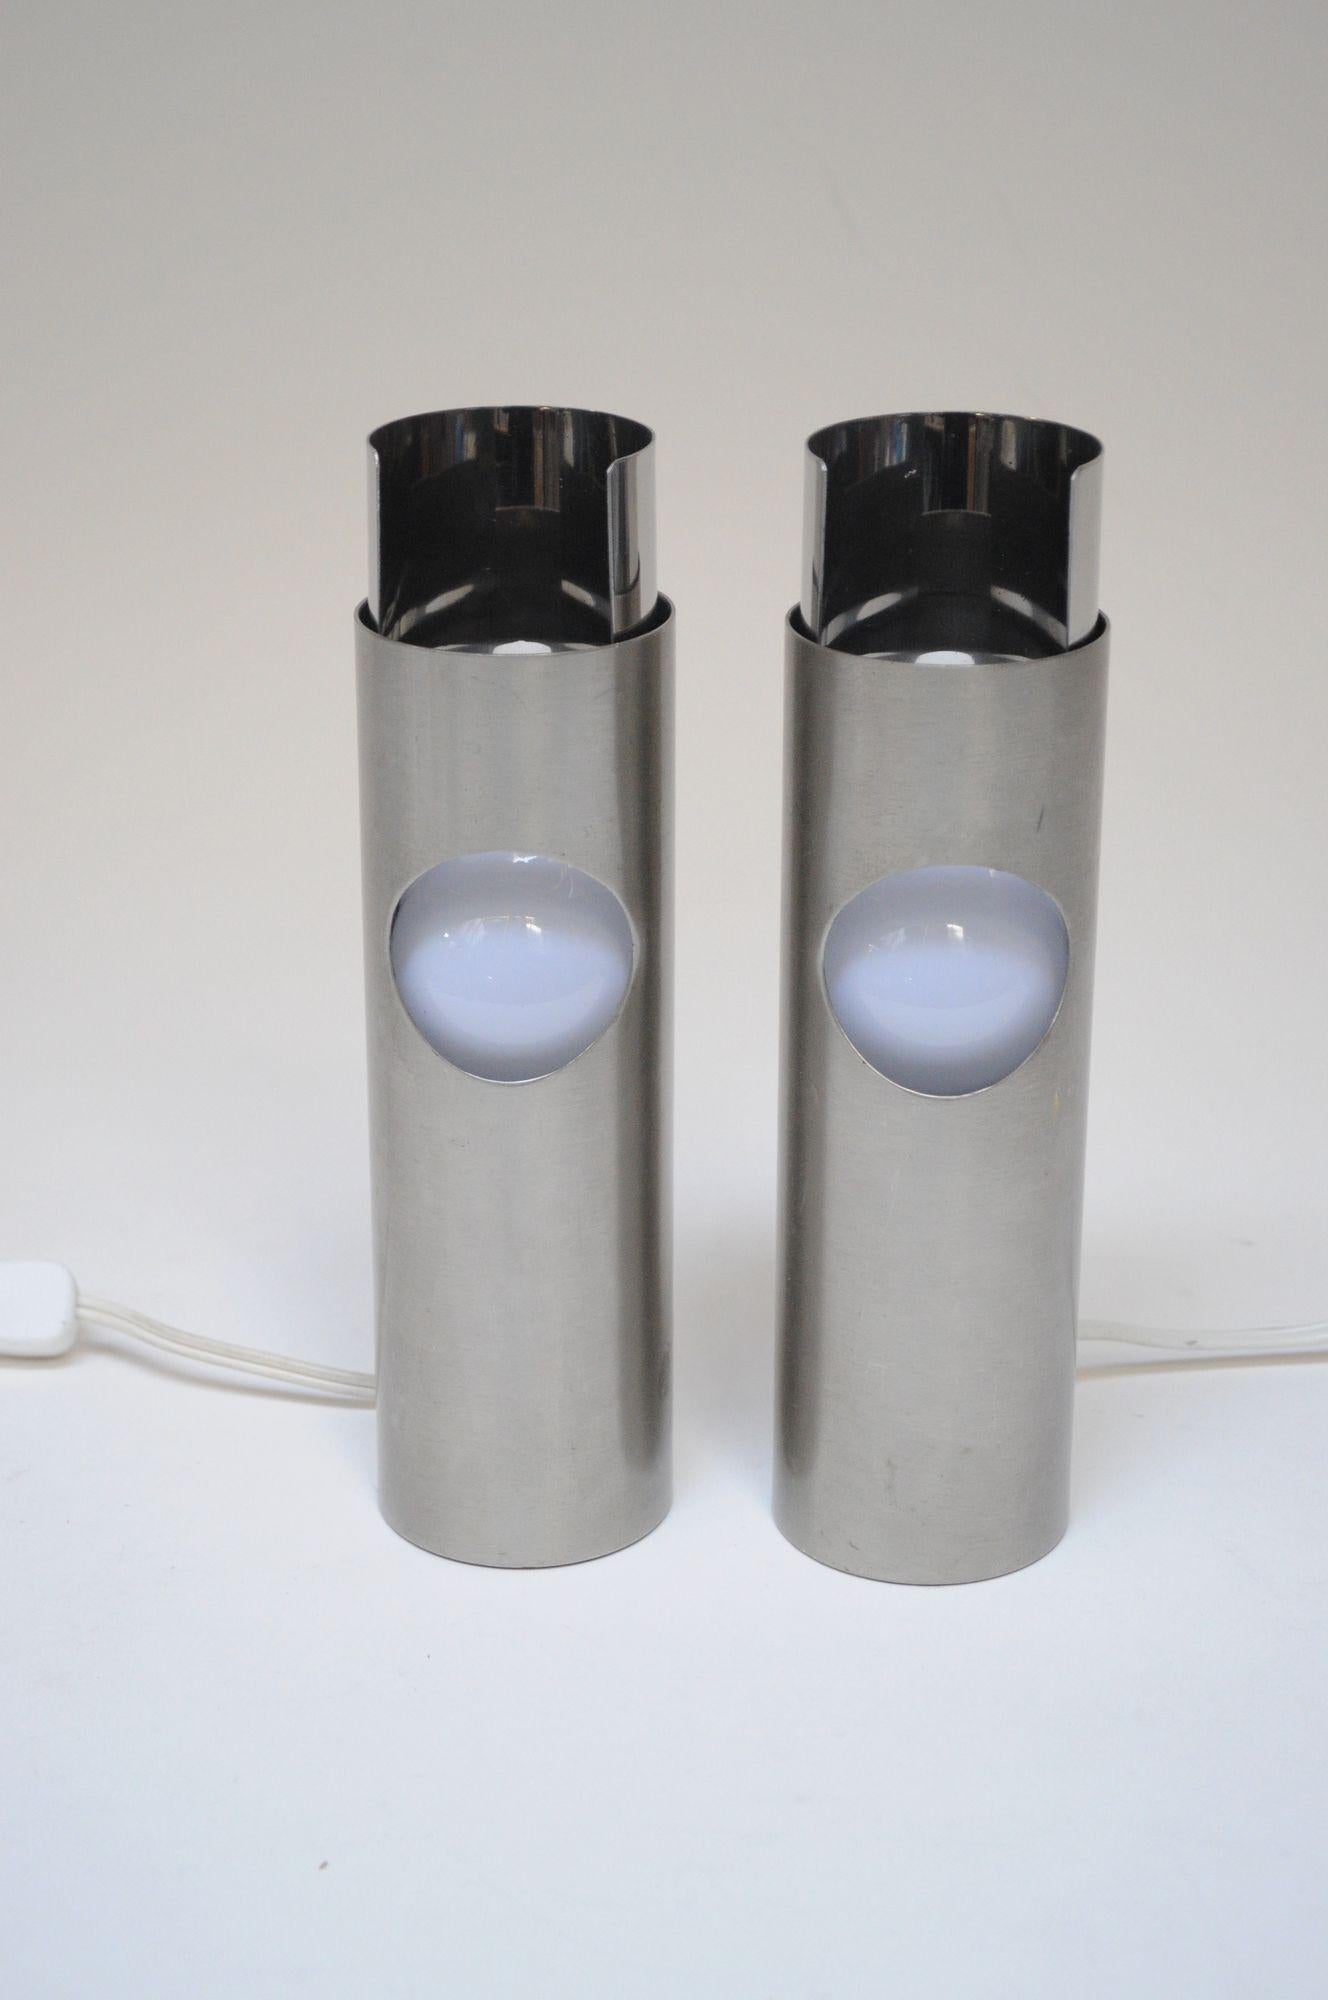 Pair of sleek, modernist, petite bedside/table lamps by Gaetano Missaglia (ca. 1970, Italy).
Composed of brushed aluminum cylinders with chromed-metal insert diffusers. Known as 